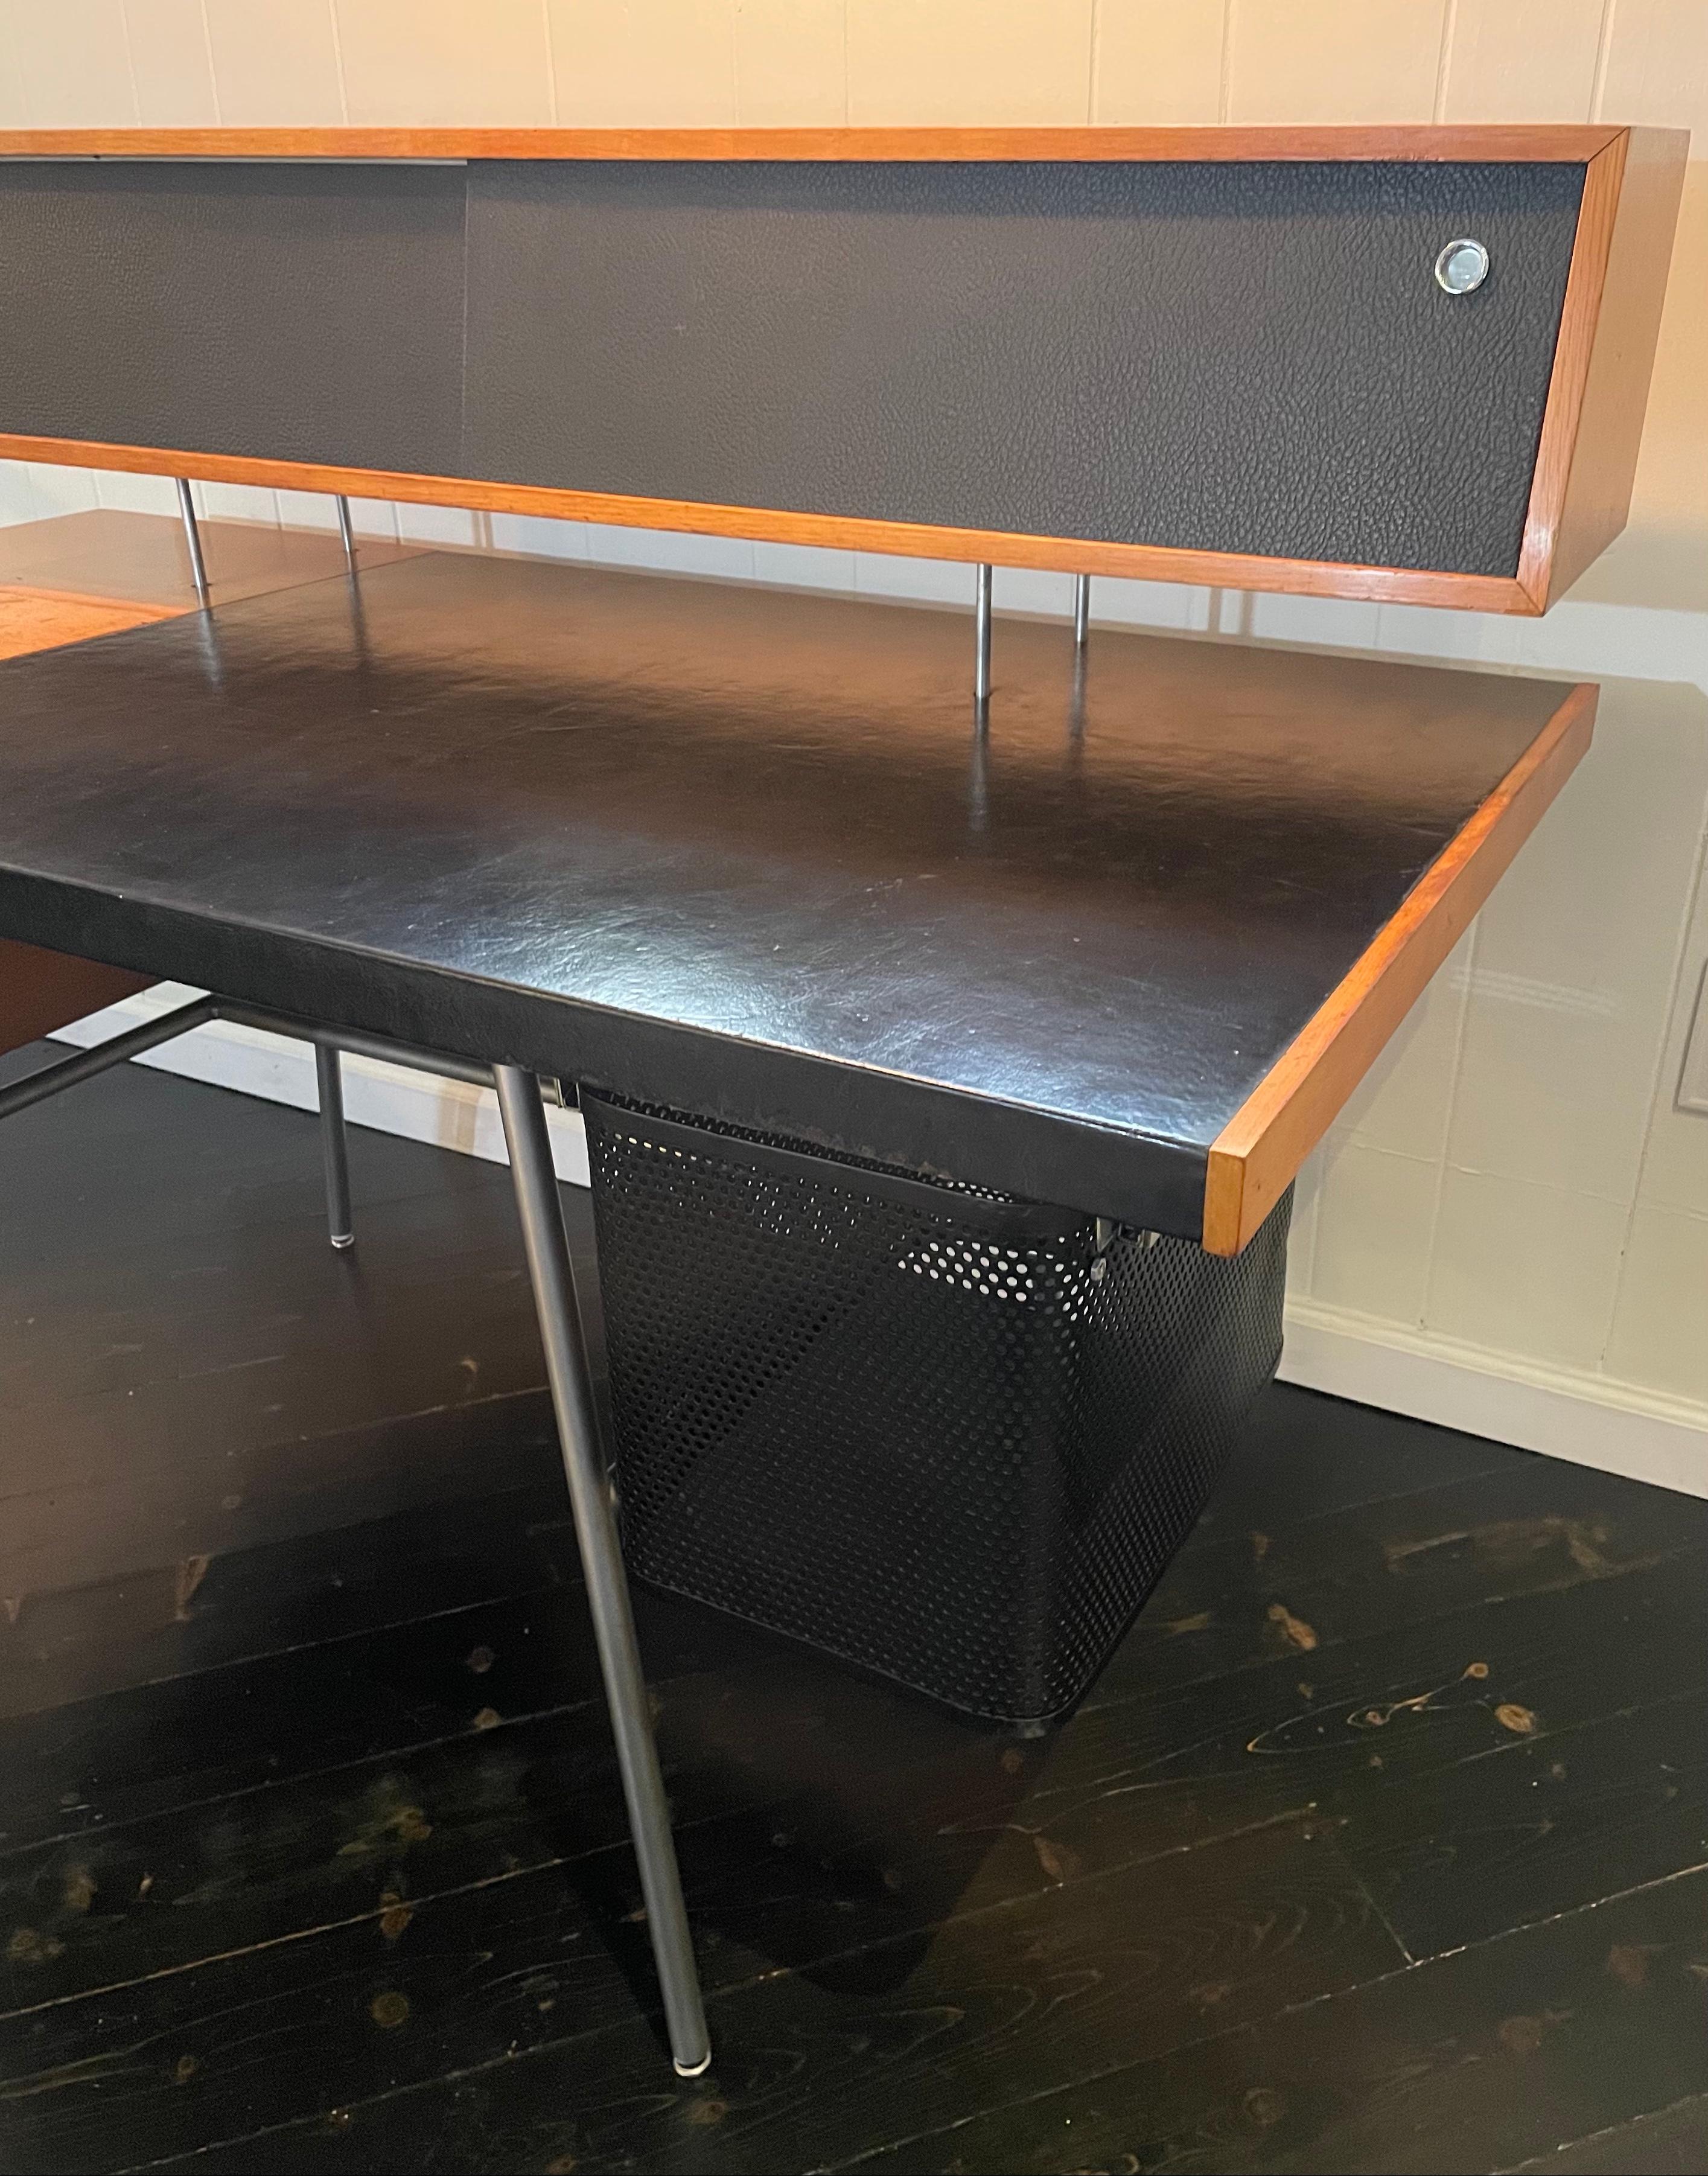 Rare black leather top desk in original condition, acquired from NYC architect's estate. This color combination is part of the permanent collection at the Cooper Hewitt Museum in New York City.

Designed by George Nelson and Associates and